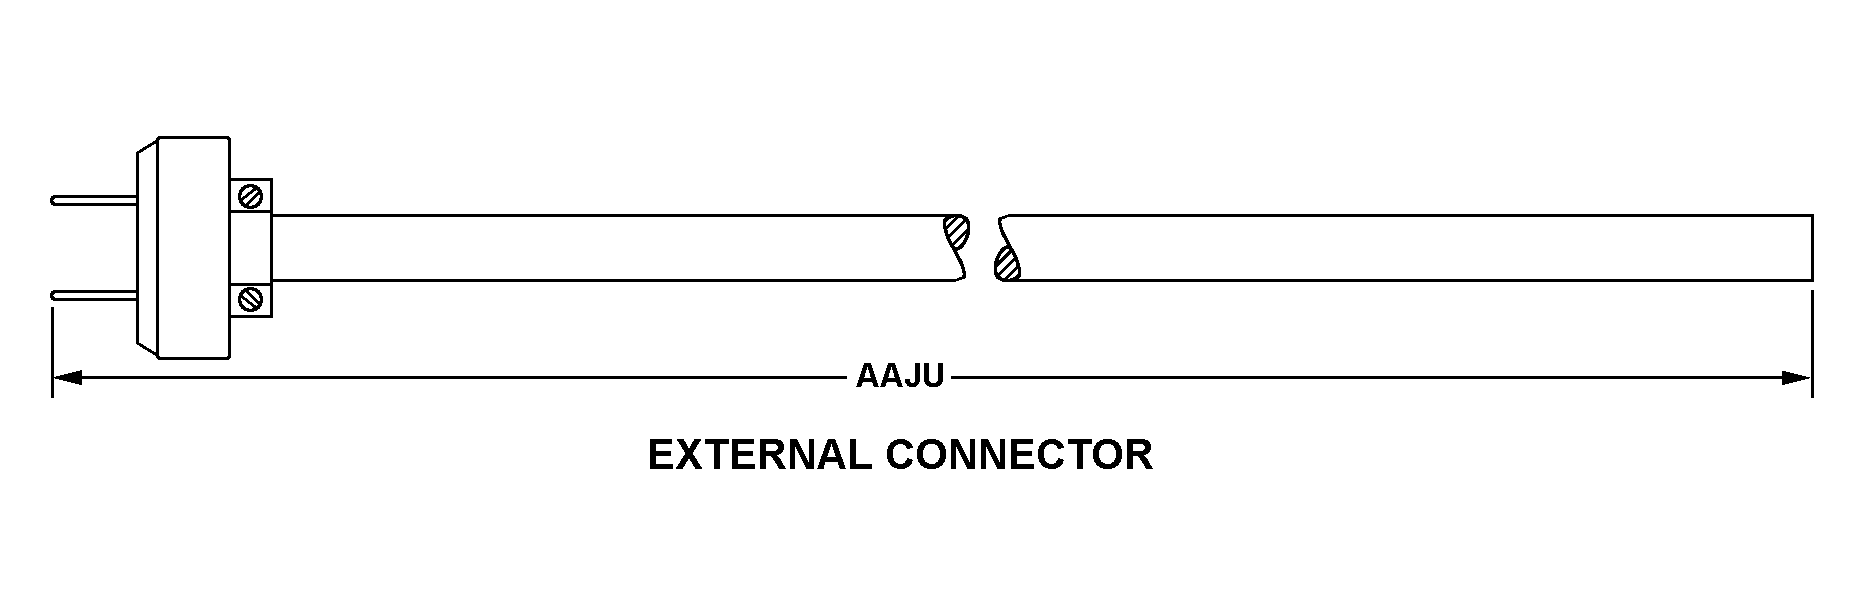 EXTERNAL CONNECTOR style nsn 5995-01-379-6559